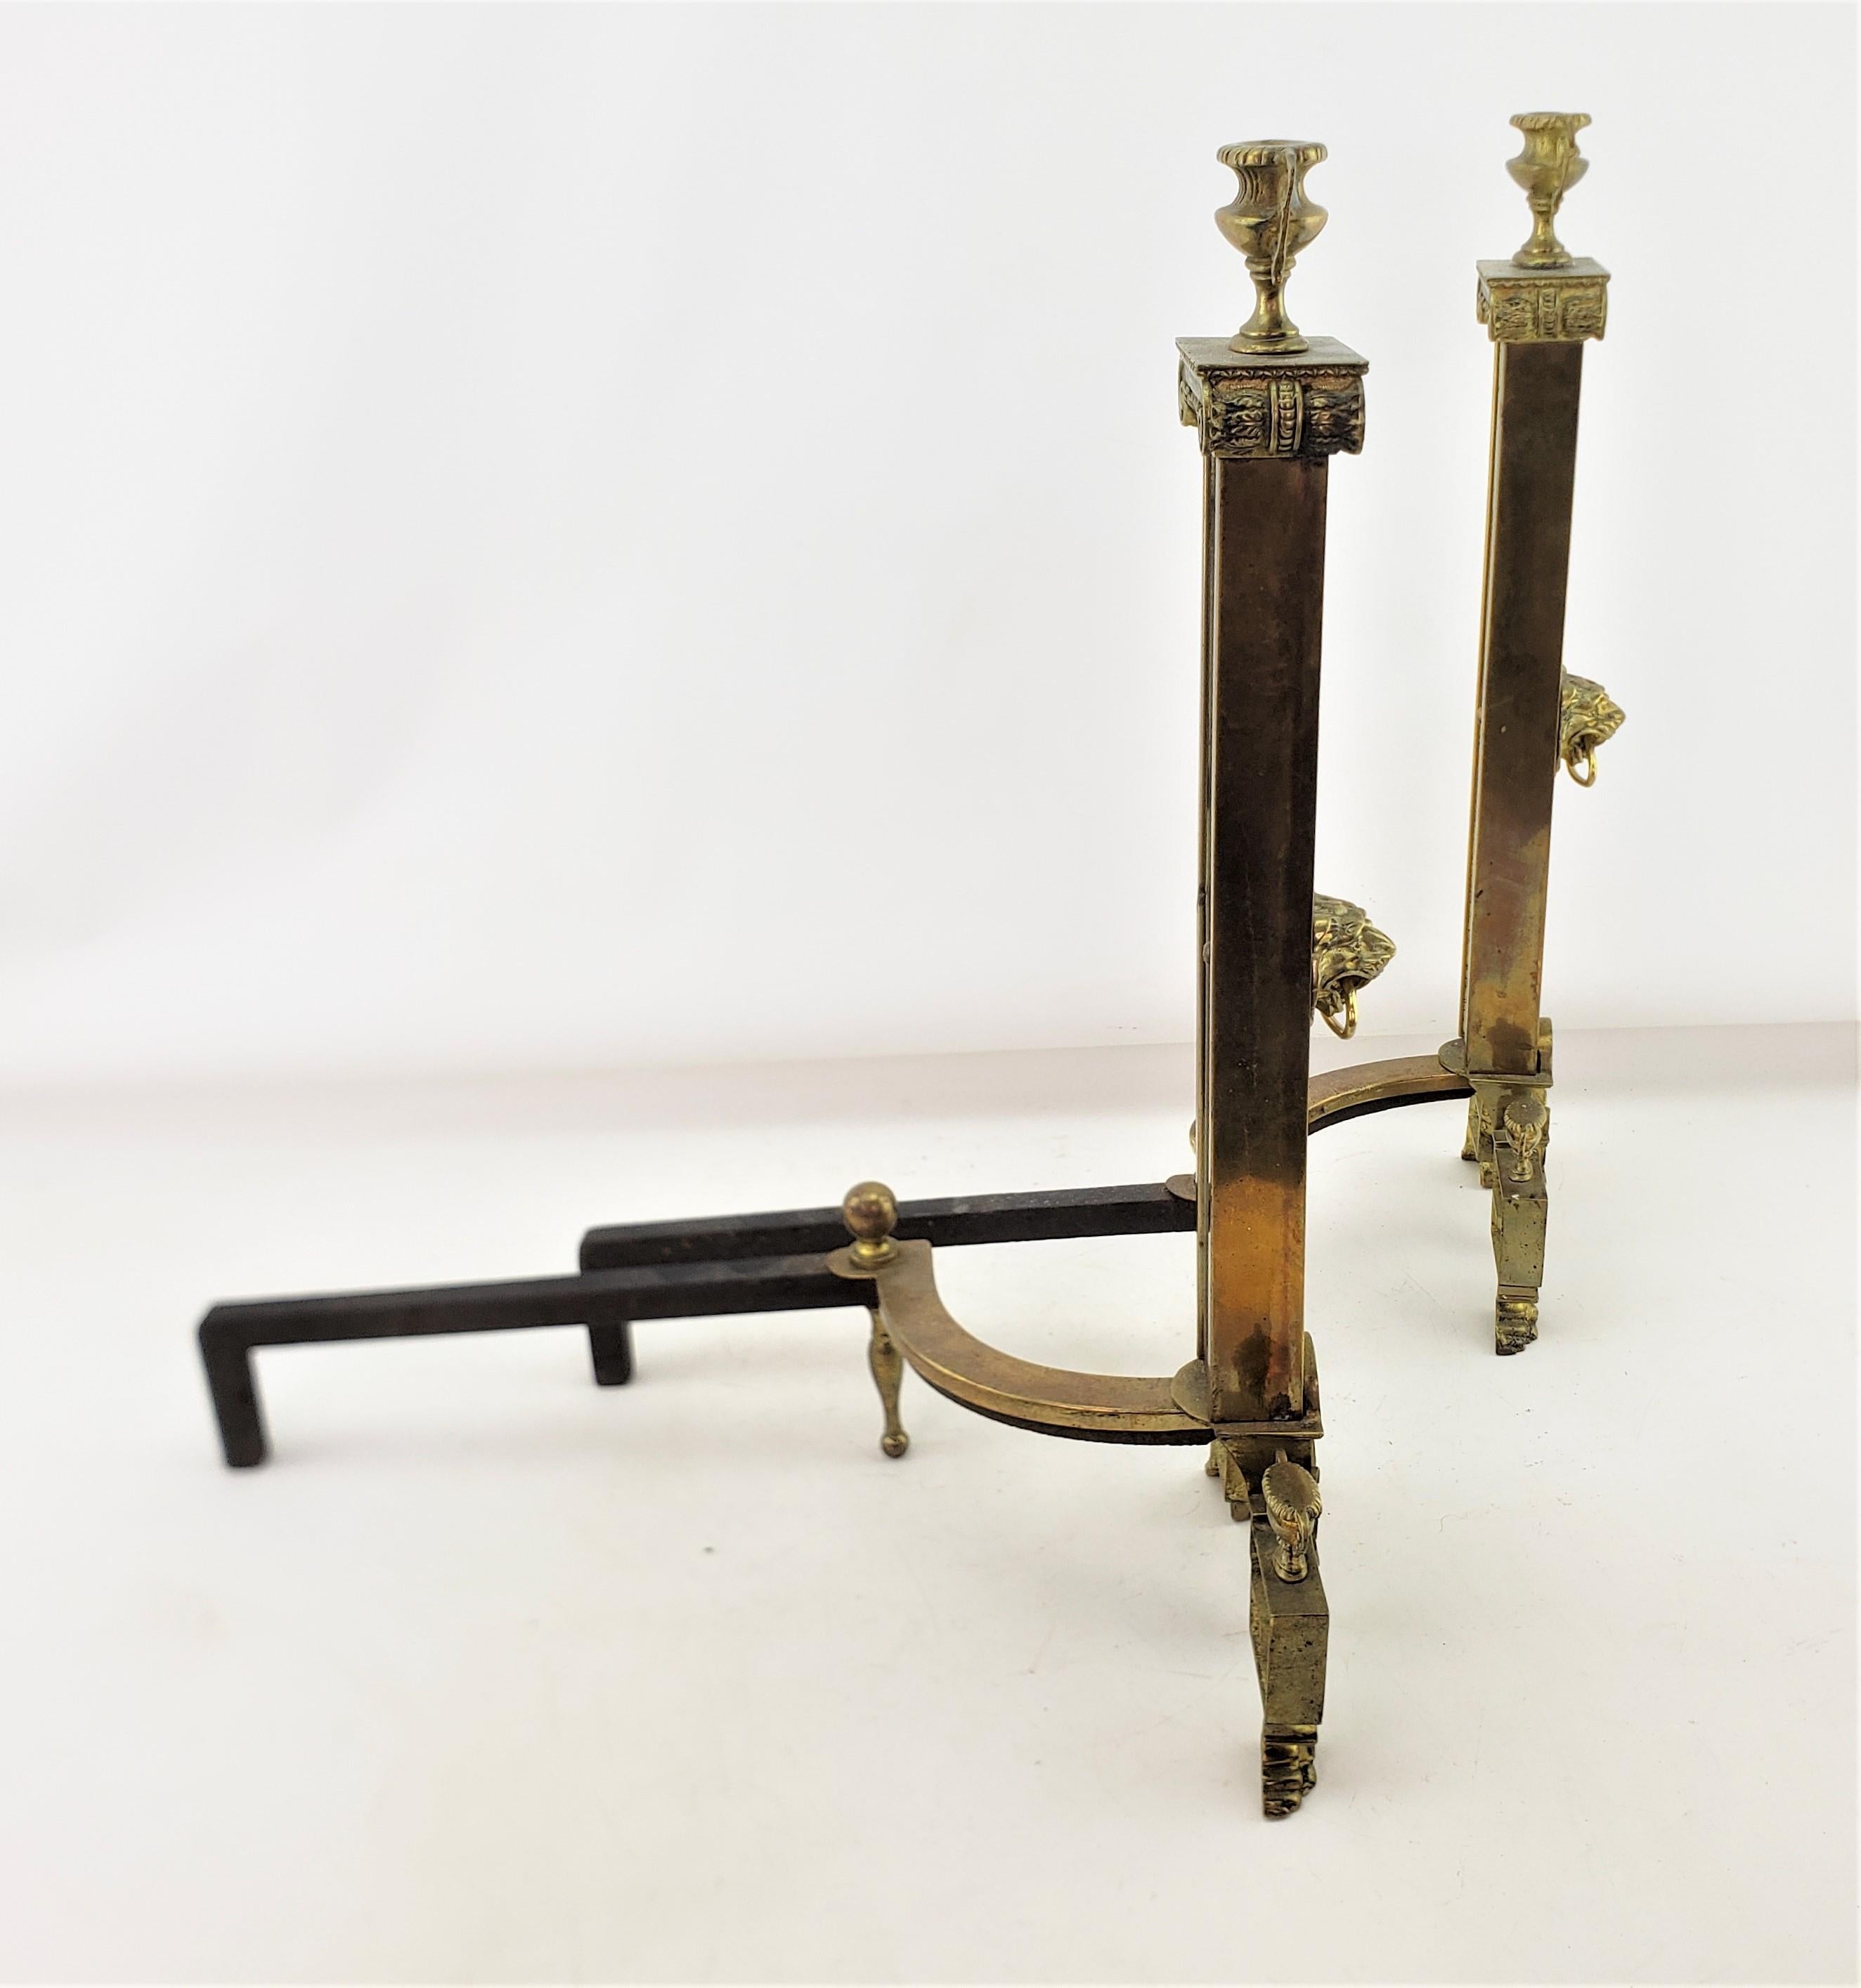 Antique Neoclassical Styled Andirons with Brass Urns & Lion Head Accents In Good Condition For Sale In Hamilton, Ontario